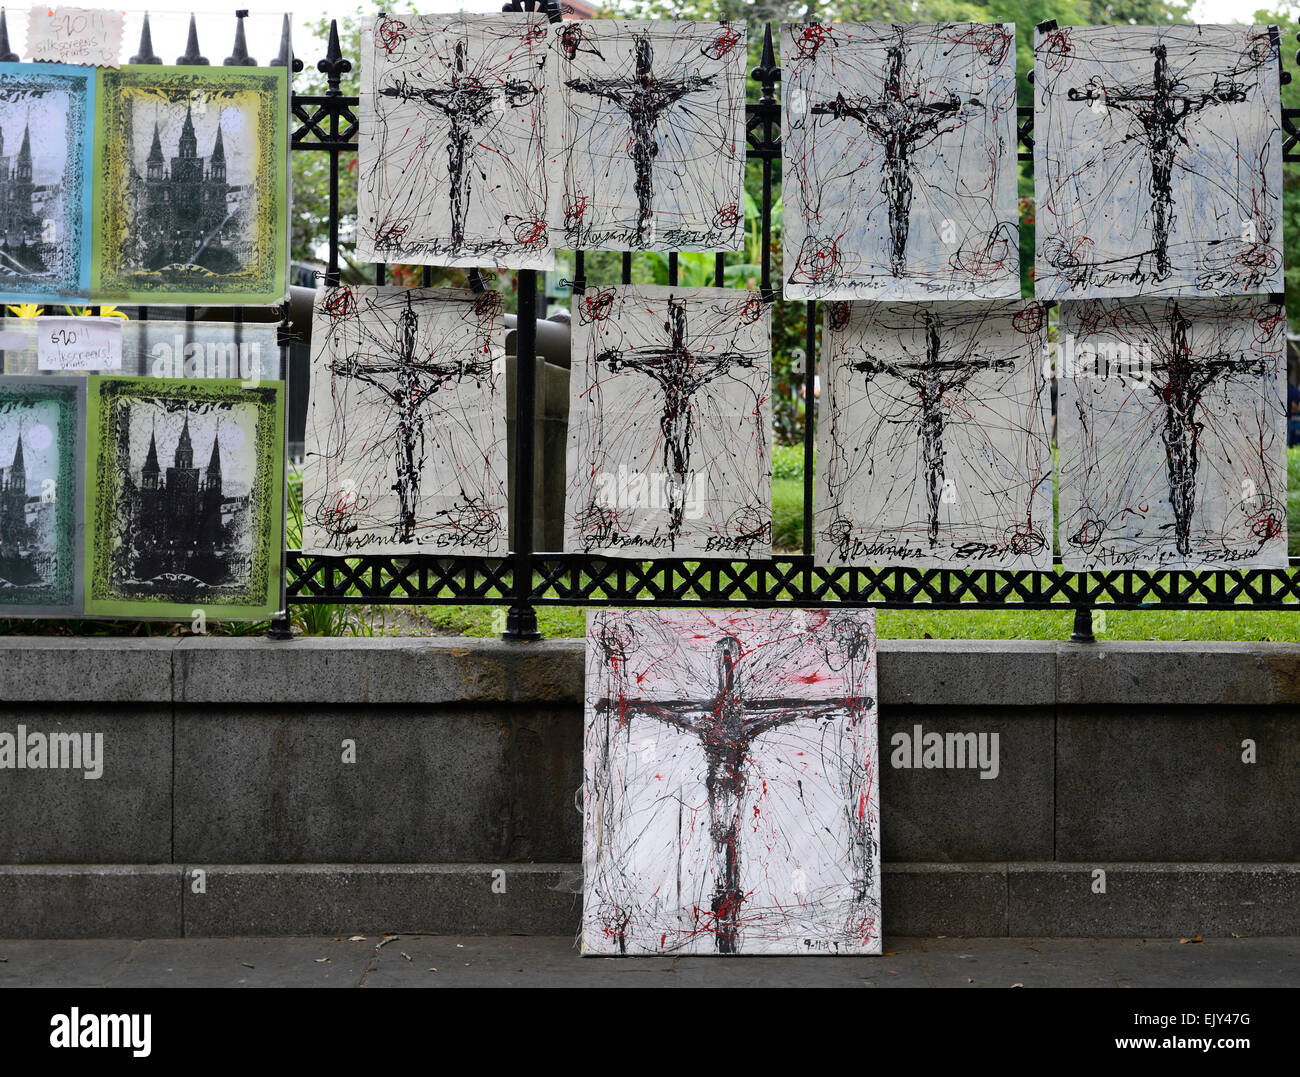 silkscreen art crucifixion scene christ religious iconography for sale sell selling outdoors railings jackson square new orleans Stock Photo